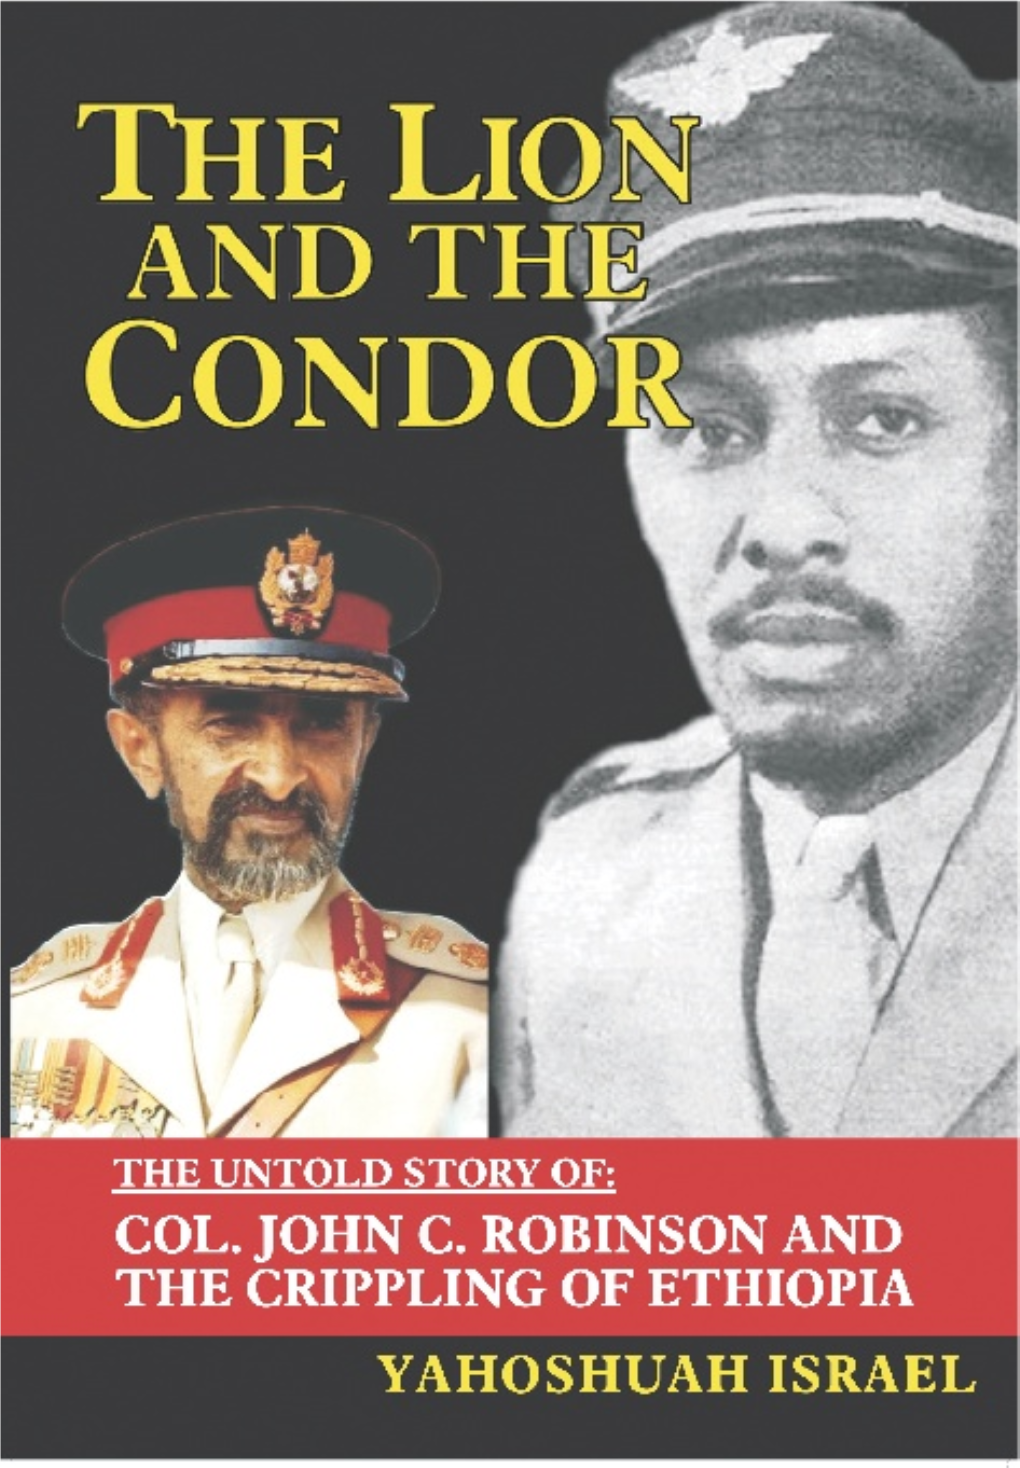 The Untold Story of Col. John C. Robinson and the Crippling of Ethiopia